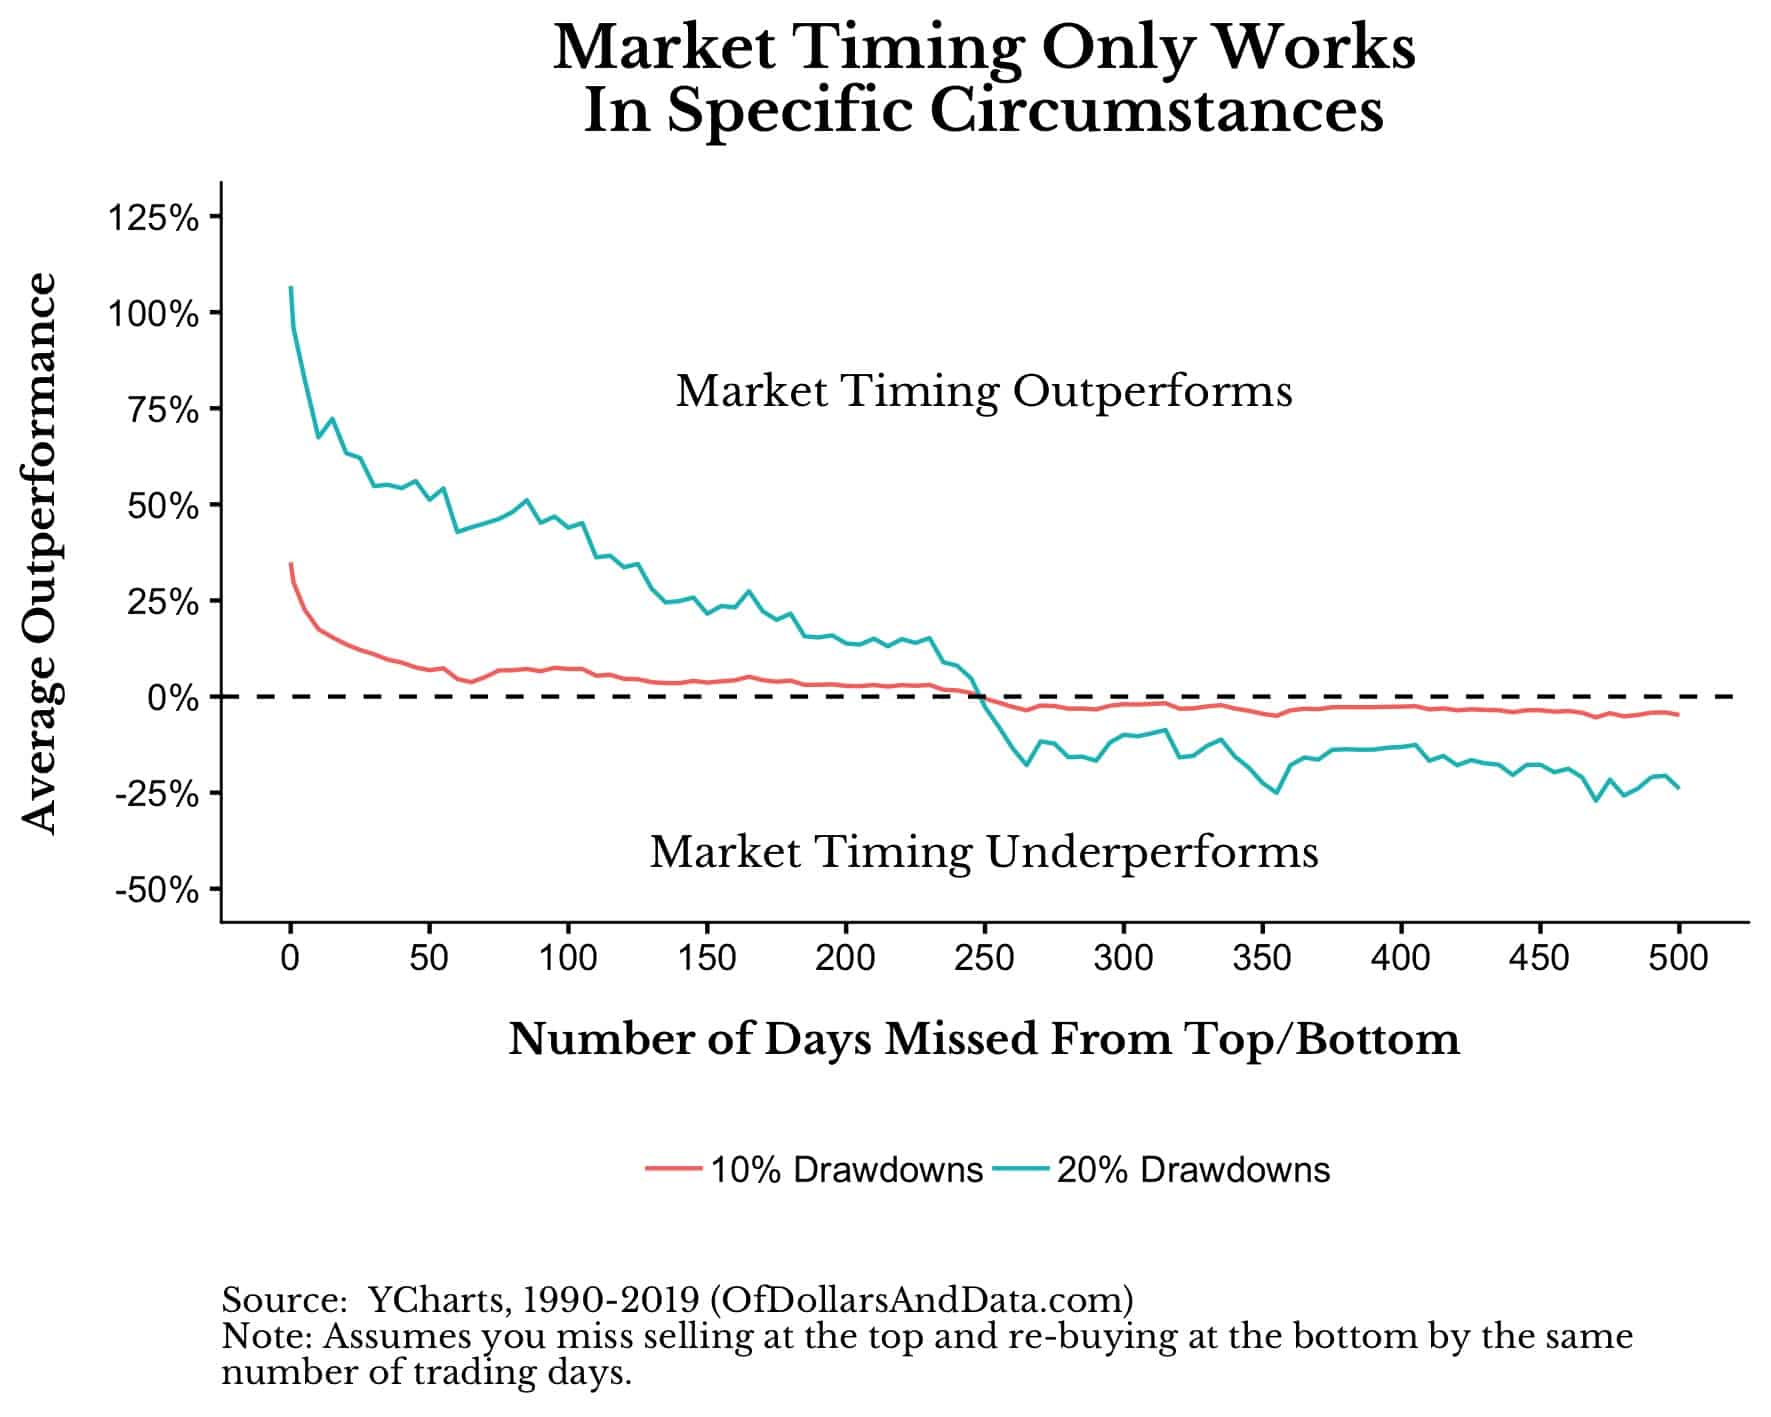 market timing performance relative to buy and hold based on the number of days missed from top/bottom